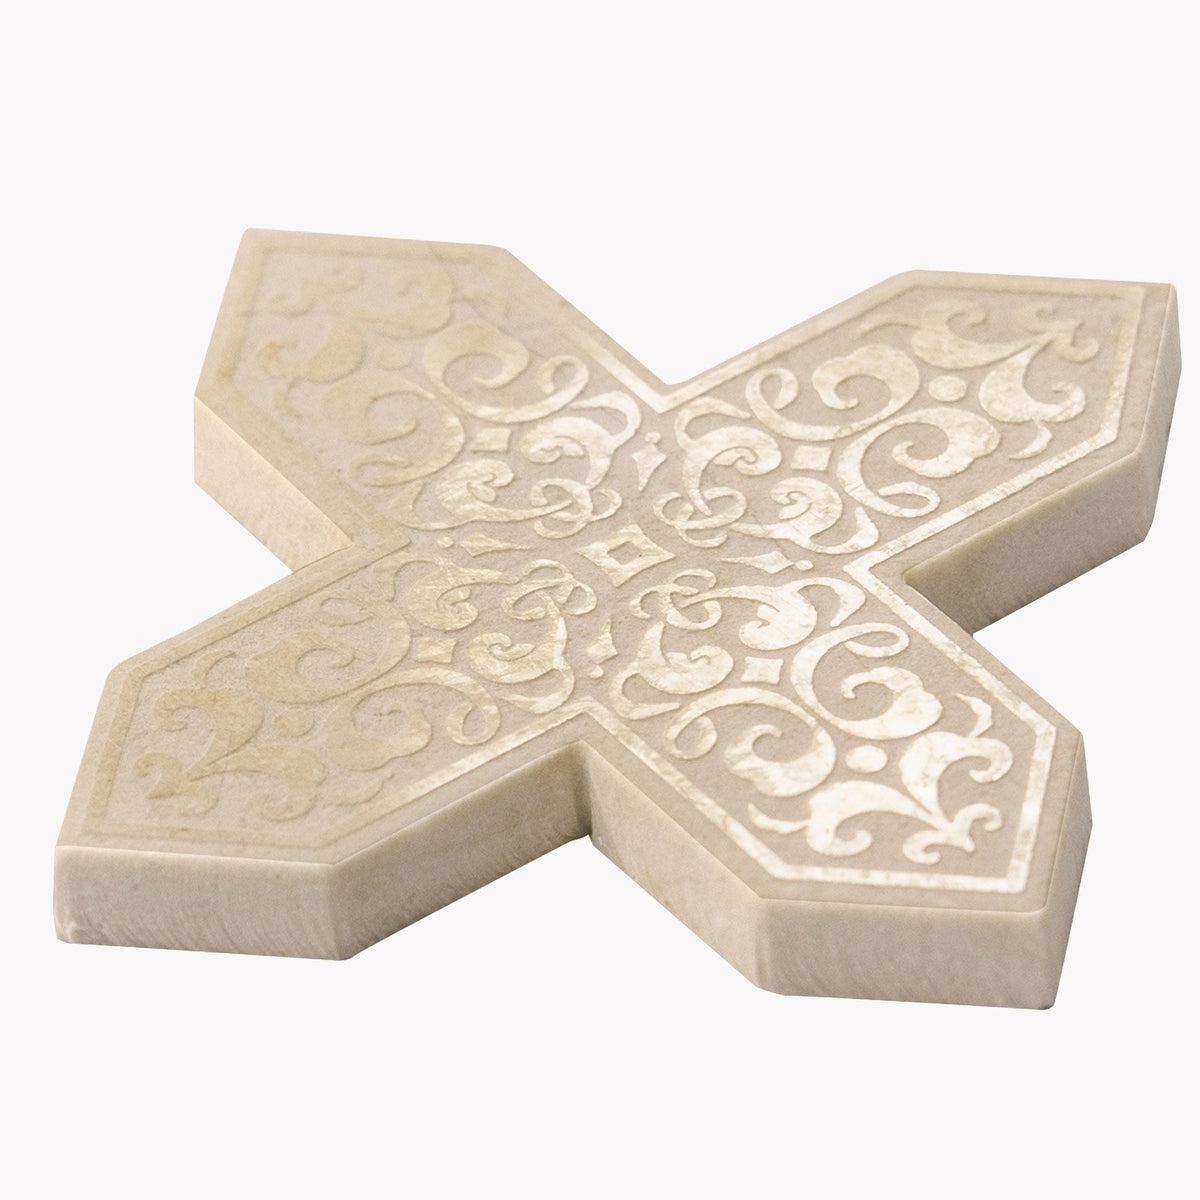 Moroccan Star & Cross Crema Etched Marble Mosaic Tile